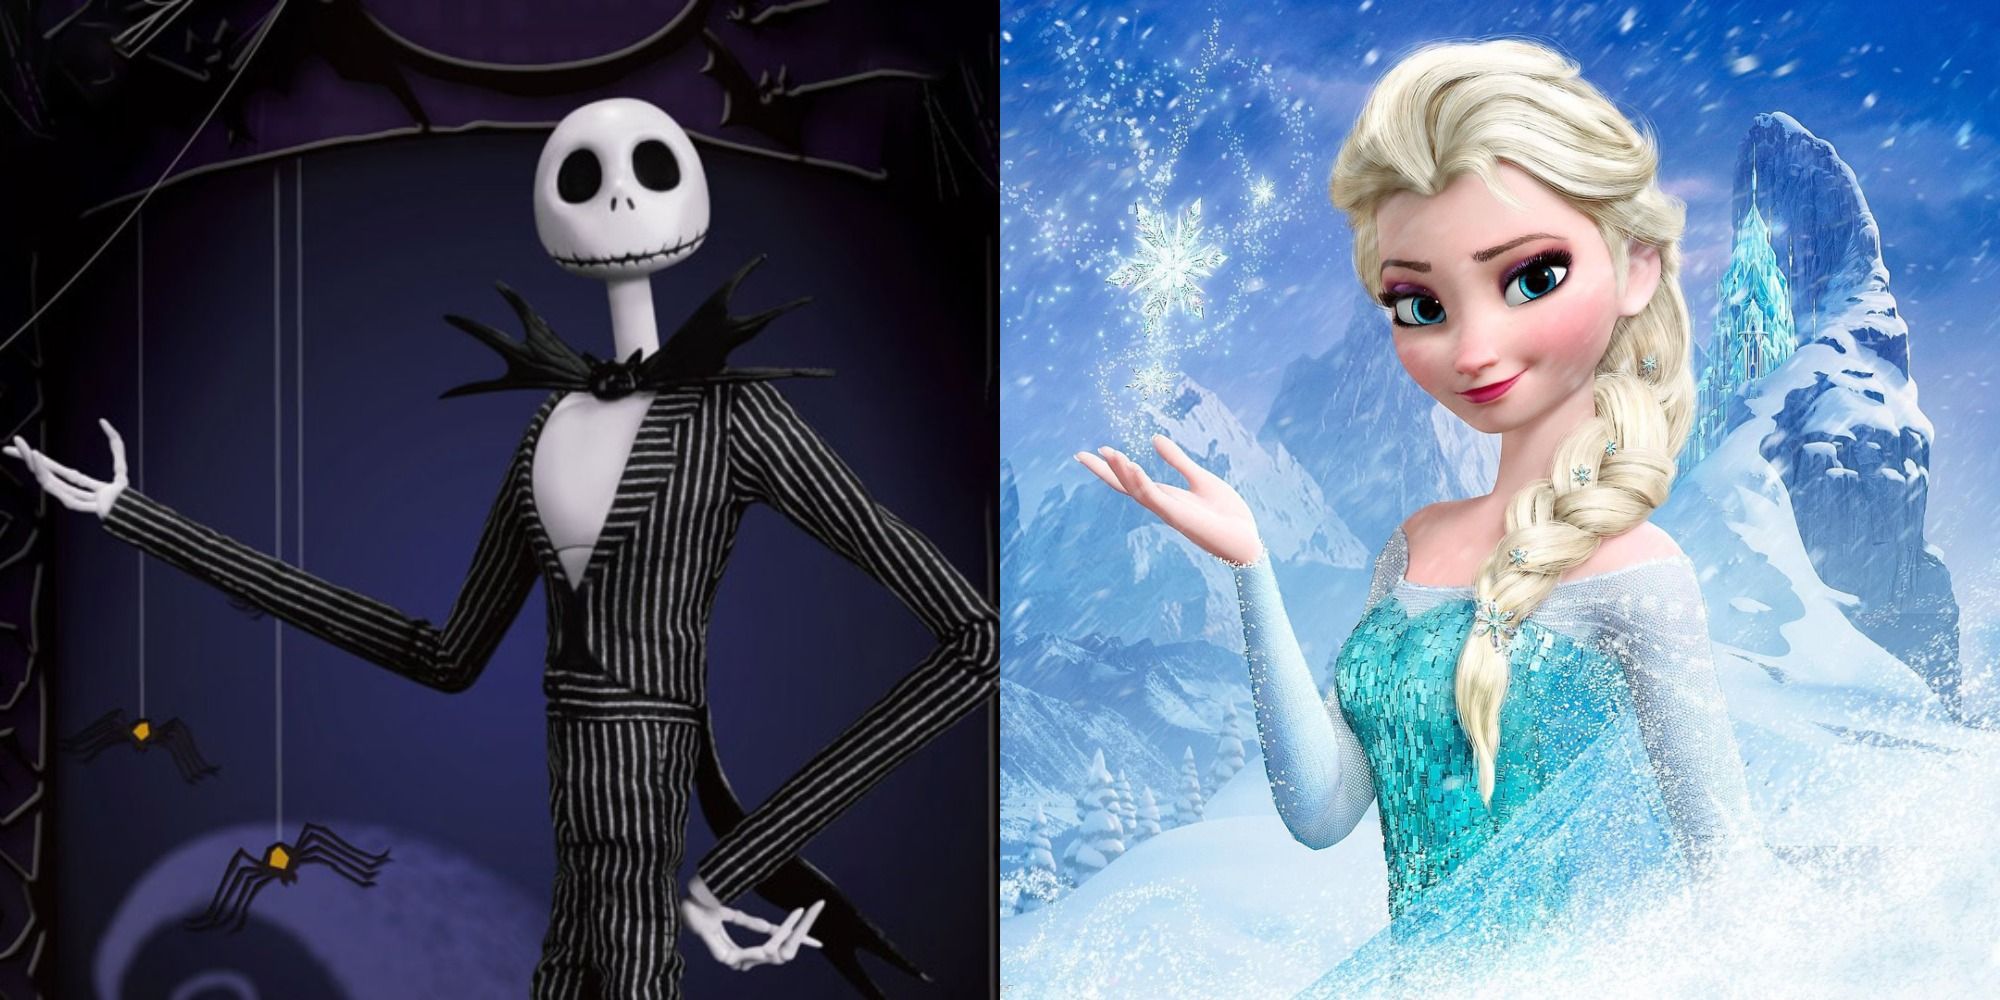 Two side by side images of Elsa from Frozen and Jack Skellington